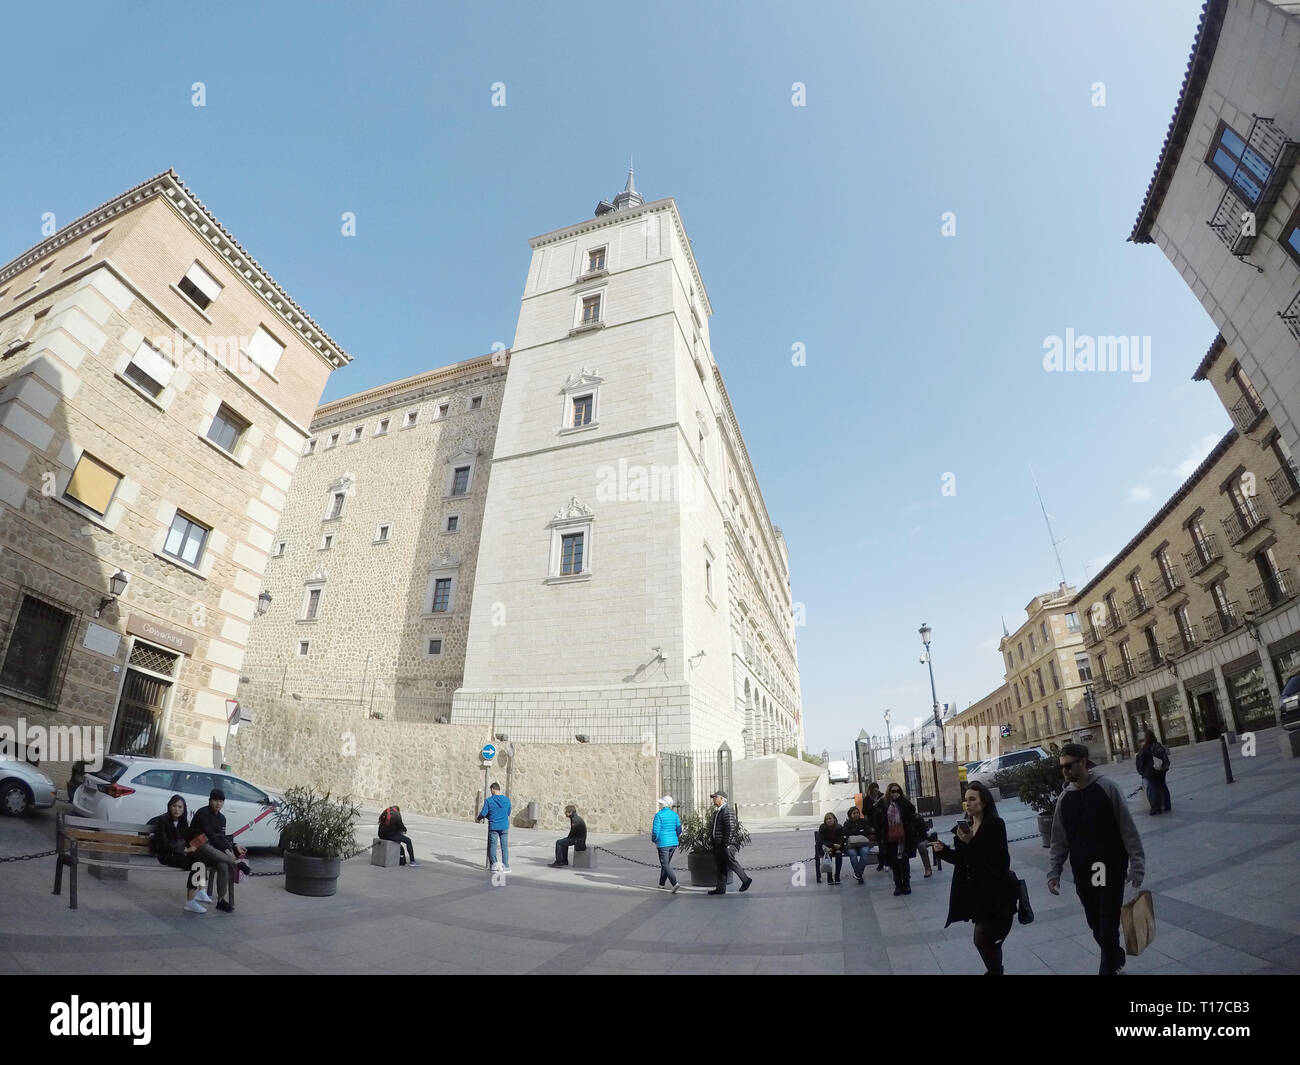 TOLEDO-SPAIN-FEB 20, 2019: The Alcázar of Toledo  is a stone fortification located in the highest part of  Toledo, Spain. Stock Photo